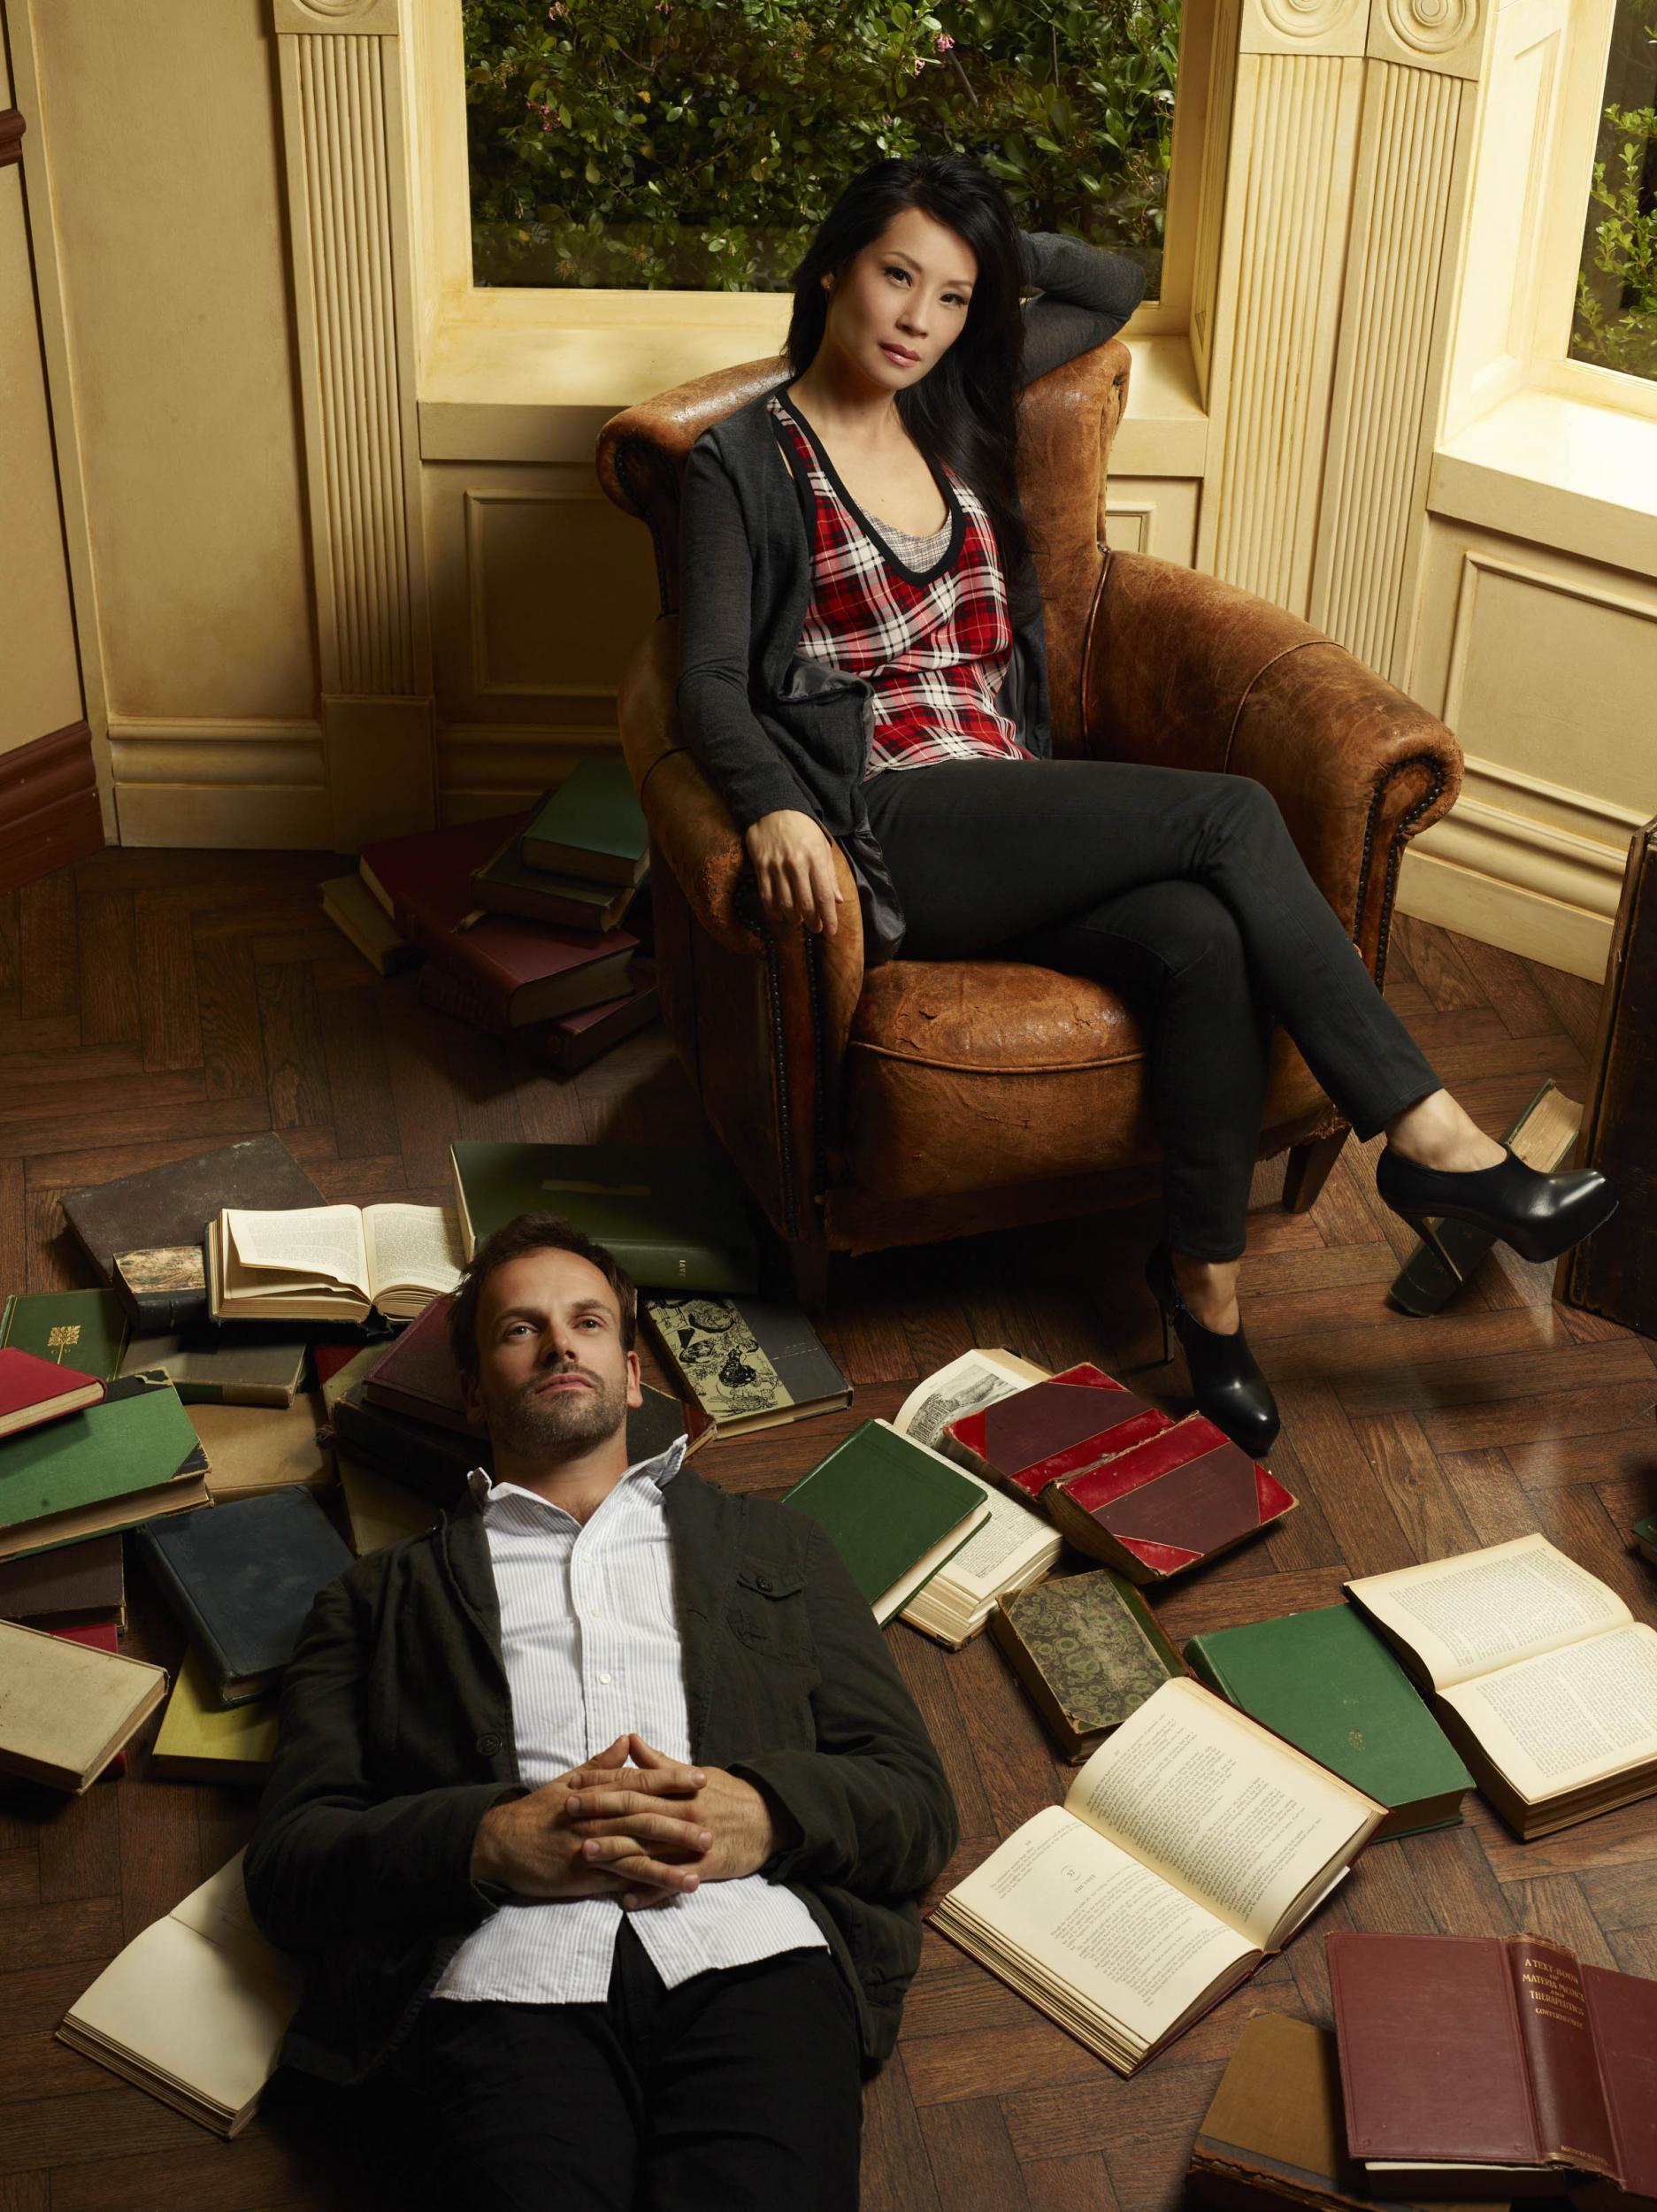 A scene from Elementary